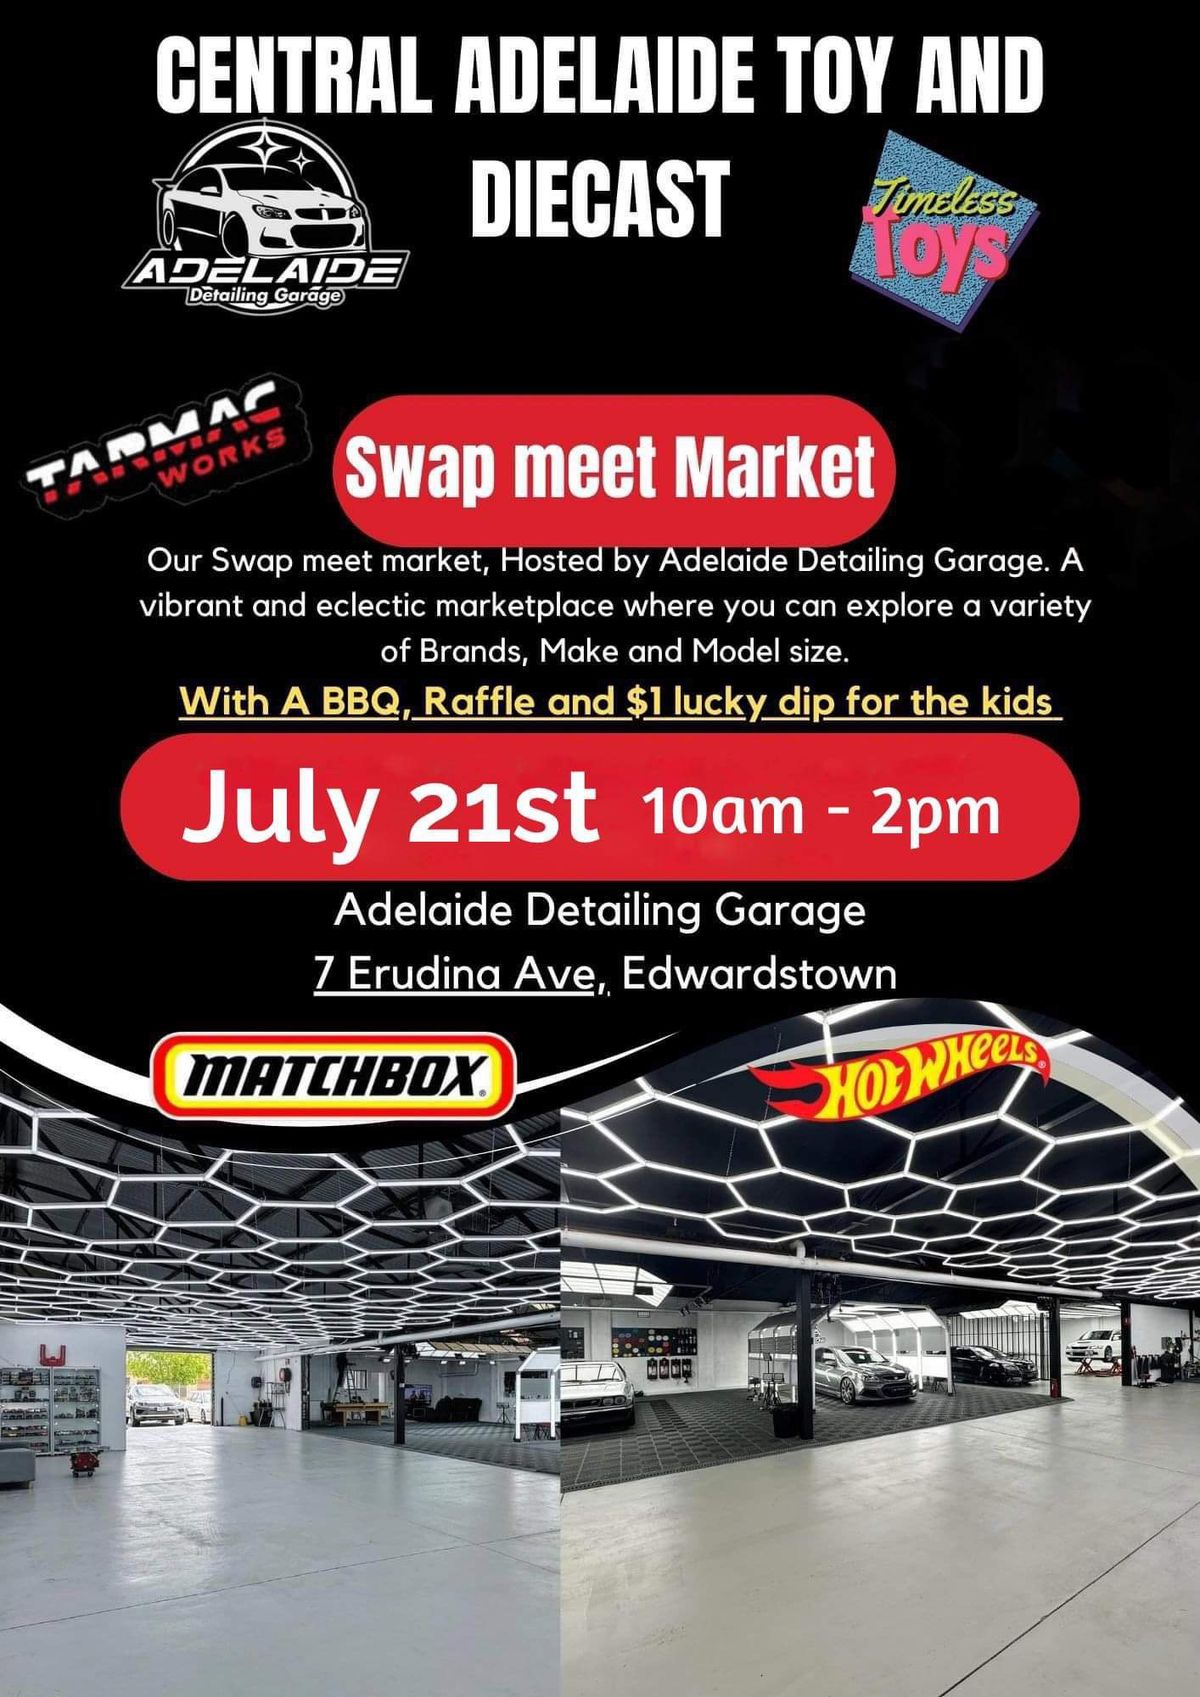 CENTRAL ADELAIDE TOY & DIECAST MEET MARKET (HOSTED BY ADELAIDE DETAILING GARAGE & TIMELESS TOYS)